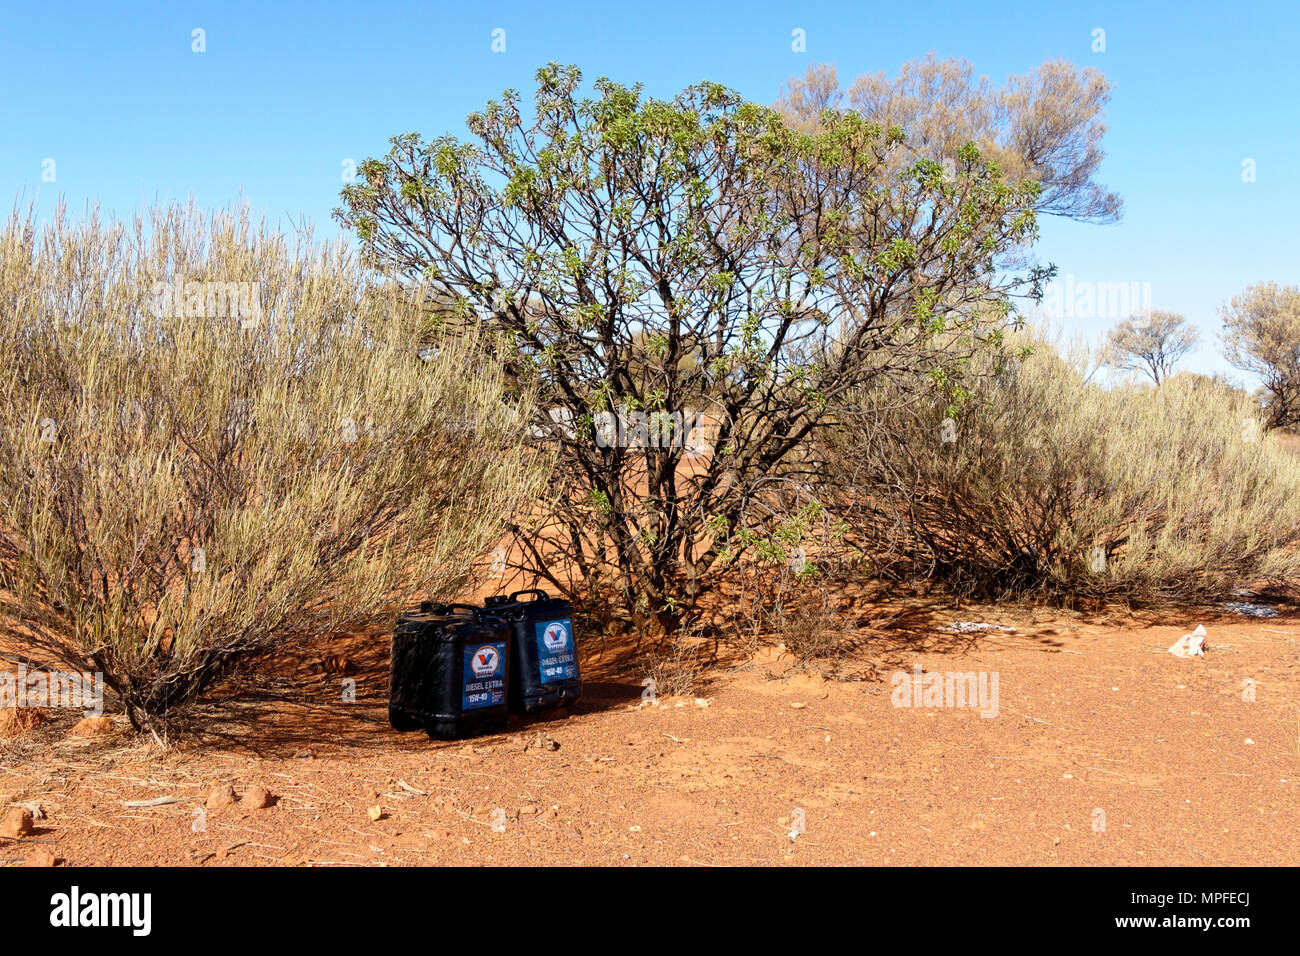 Plastic motor oil containers left in Australian outback, Goldfields, Western Australia Stock Photo